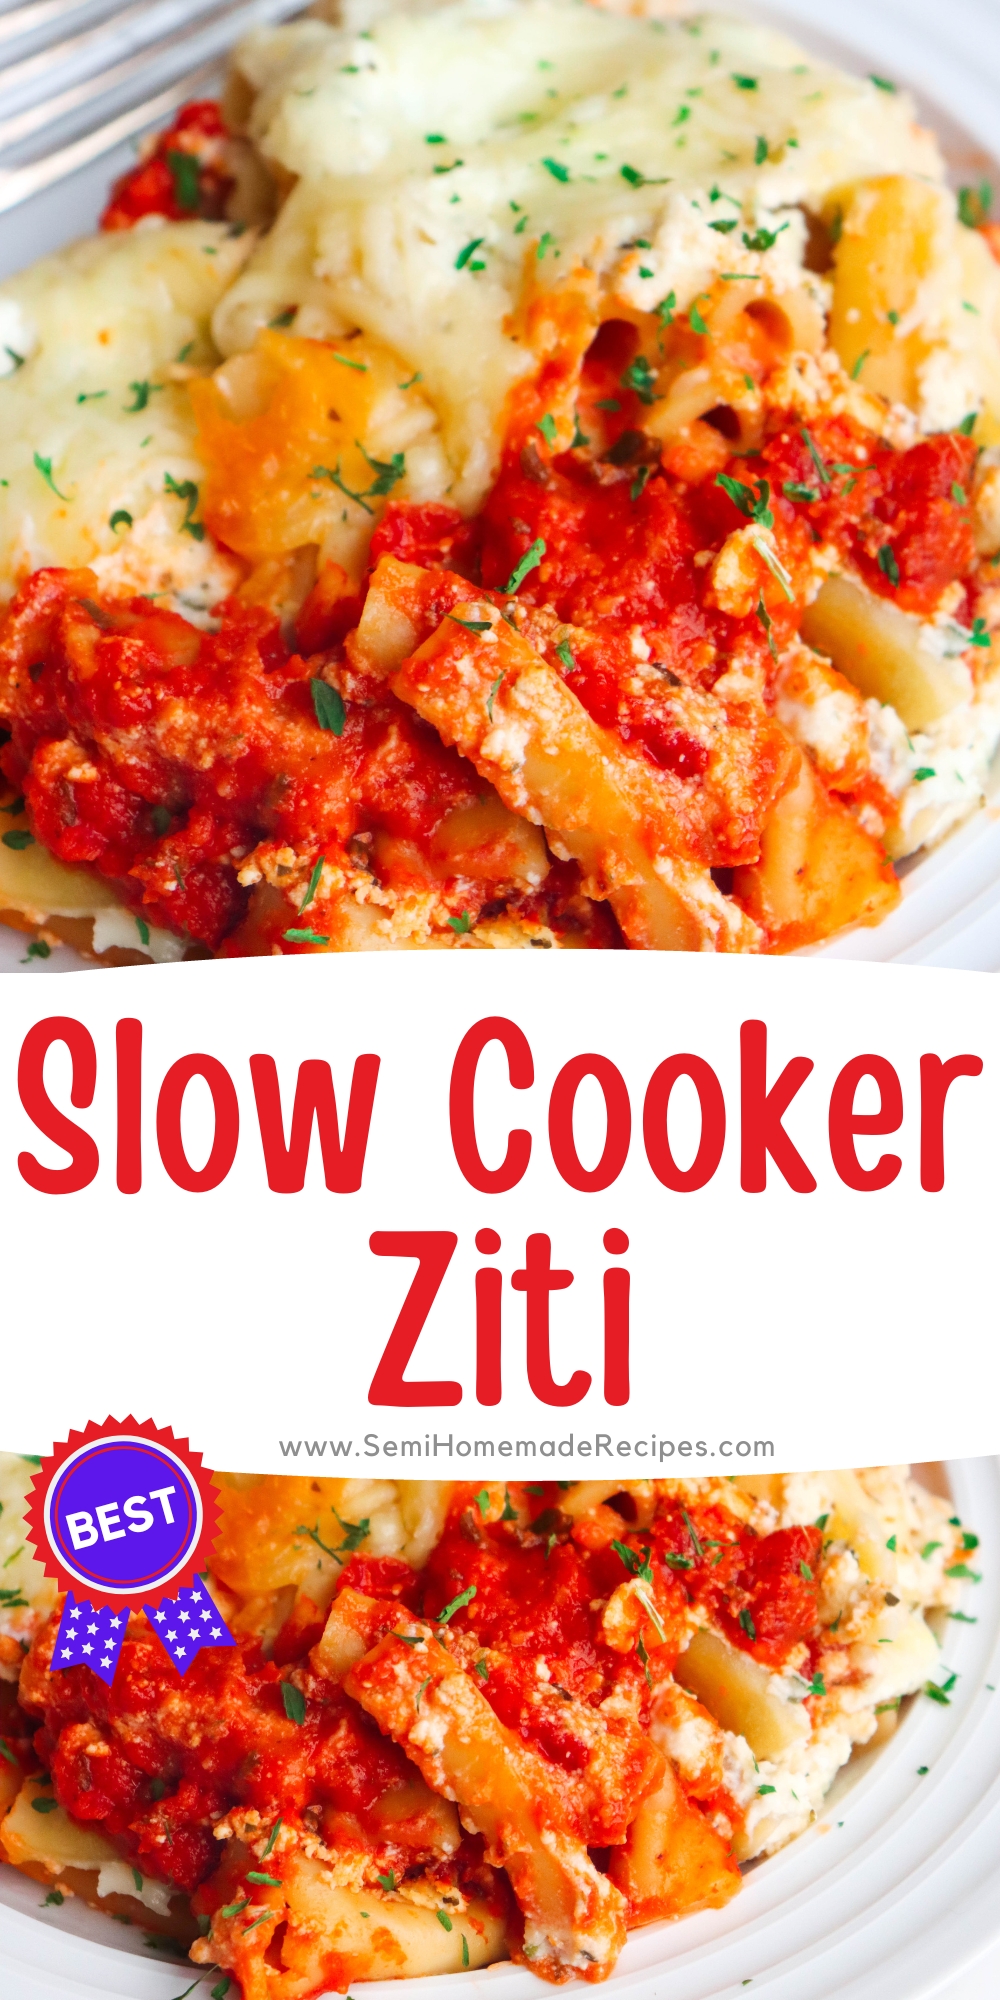 This Slow Cooker Ziti comes together in a snap and is perfect served along slices of homemade garlic bread. You'll love how easy this crock pot ziti is to toss together for lunch or dinner!